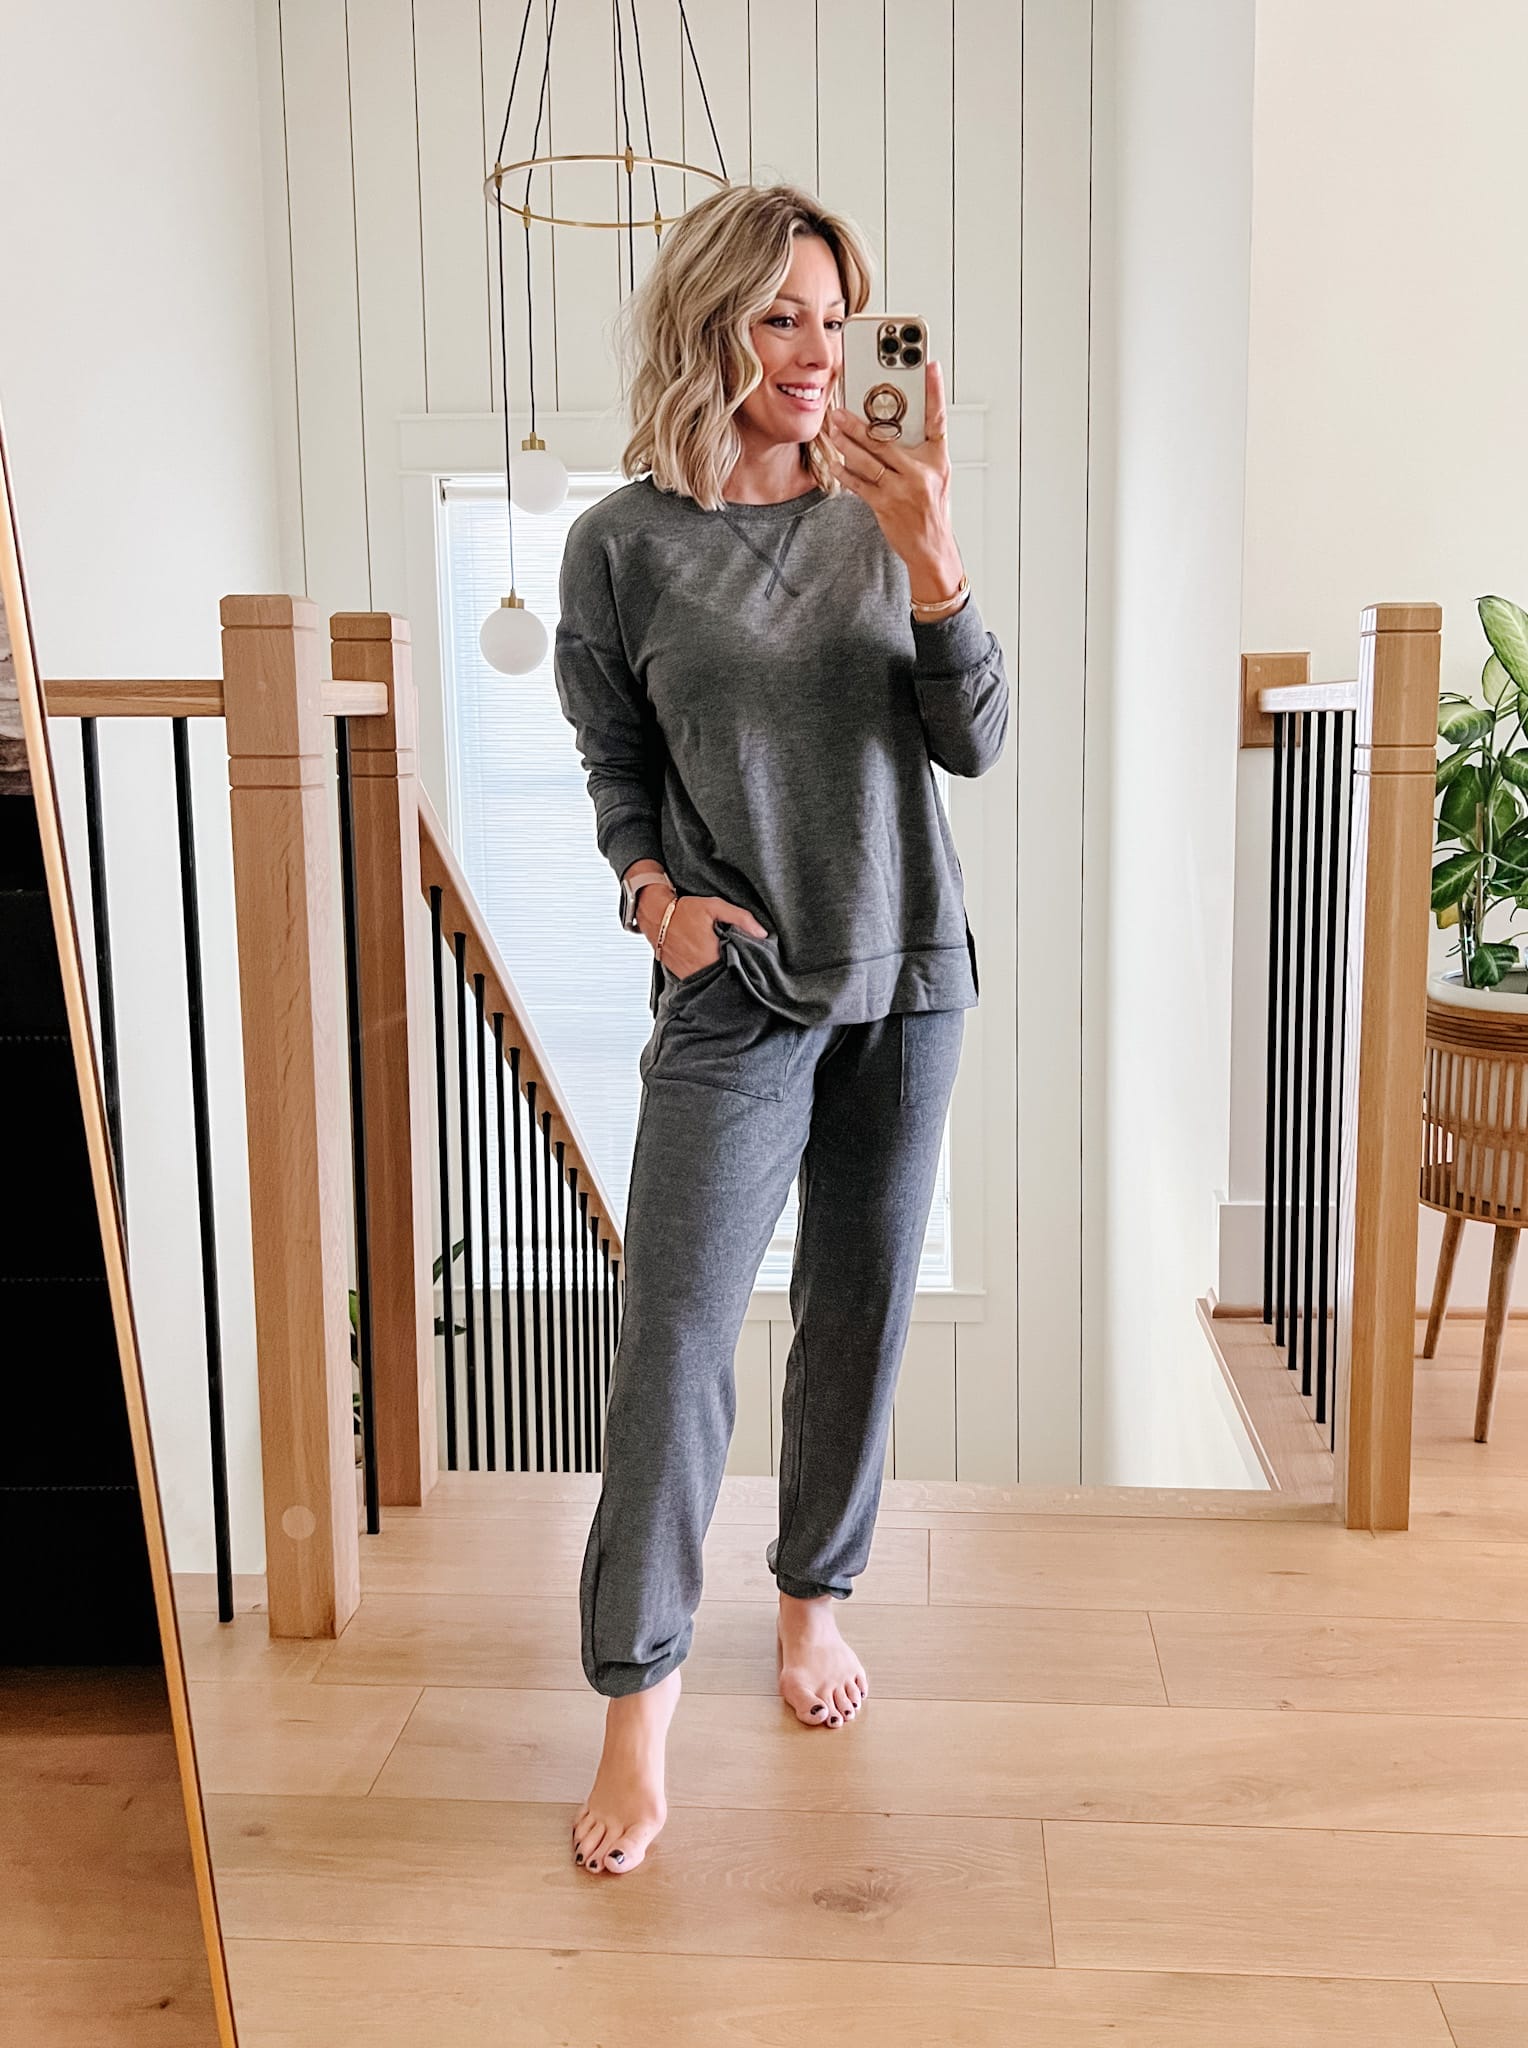 Walmart pullover and jogger outfit